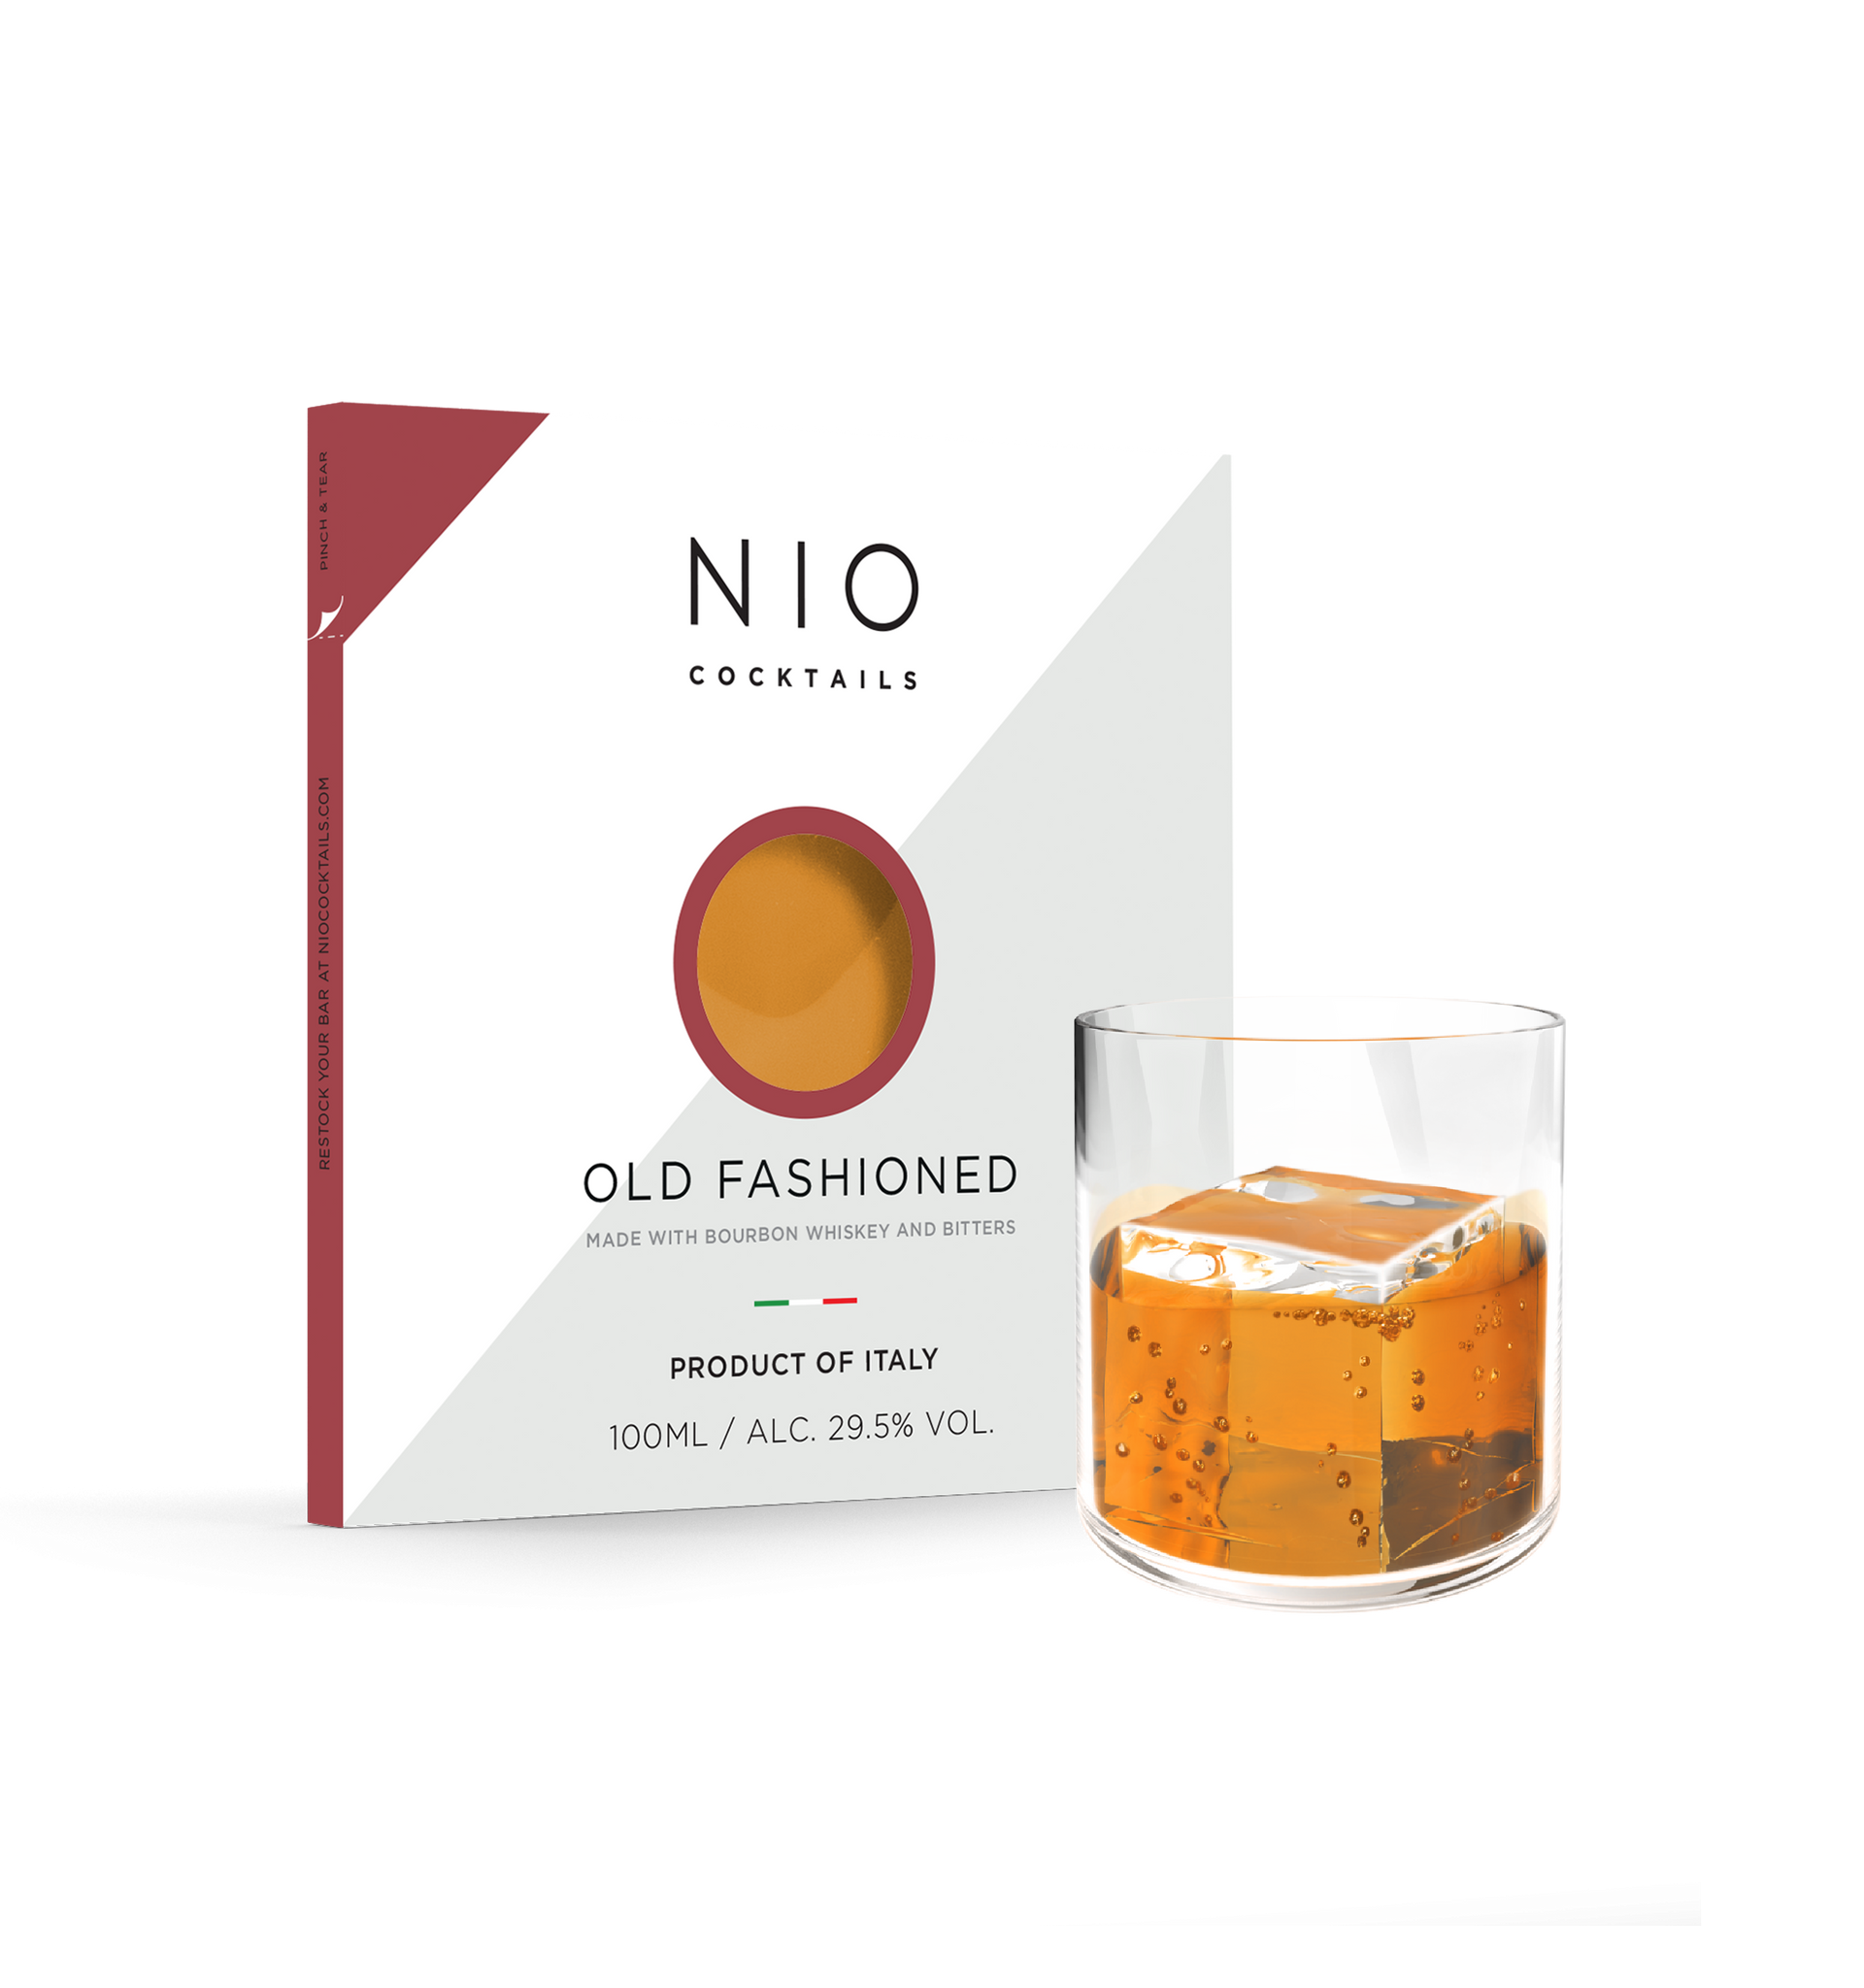 NIO COCKTAILS Old Fashioned glass